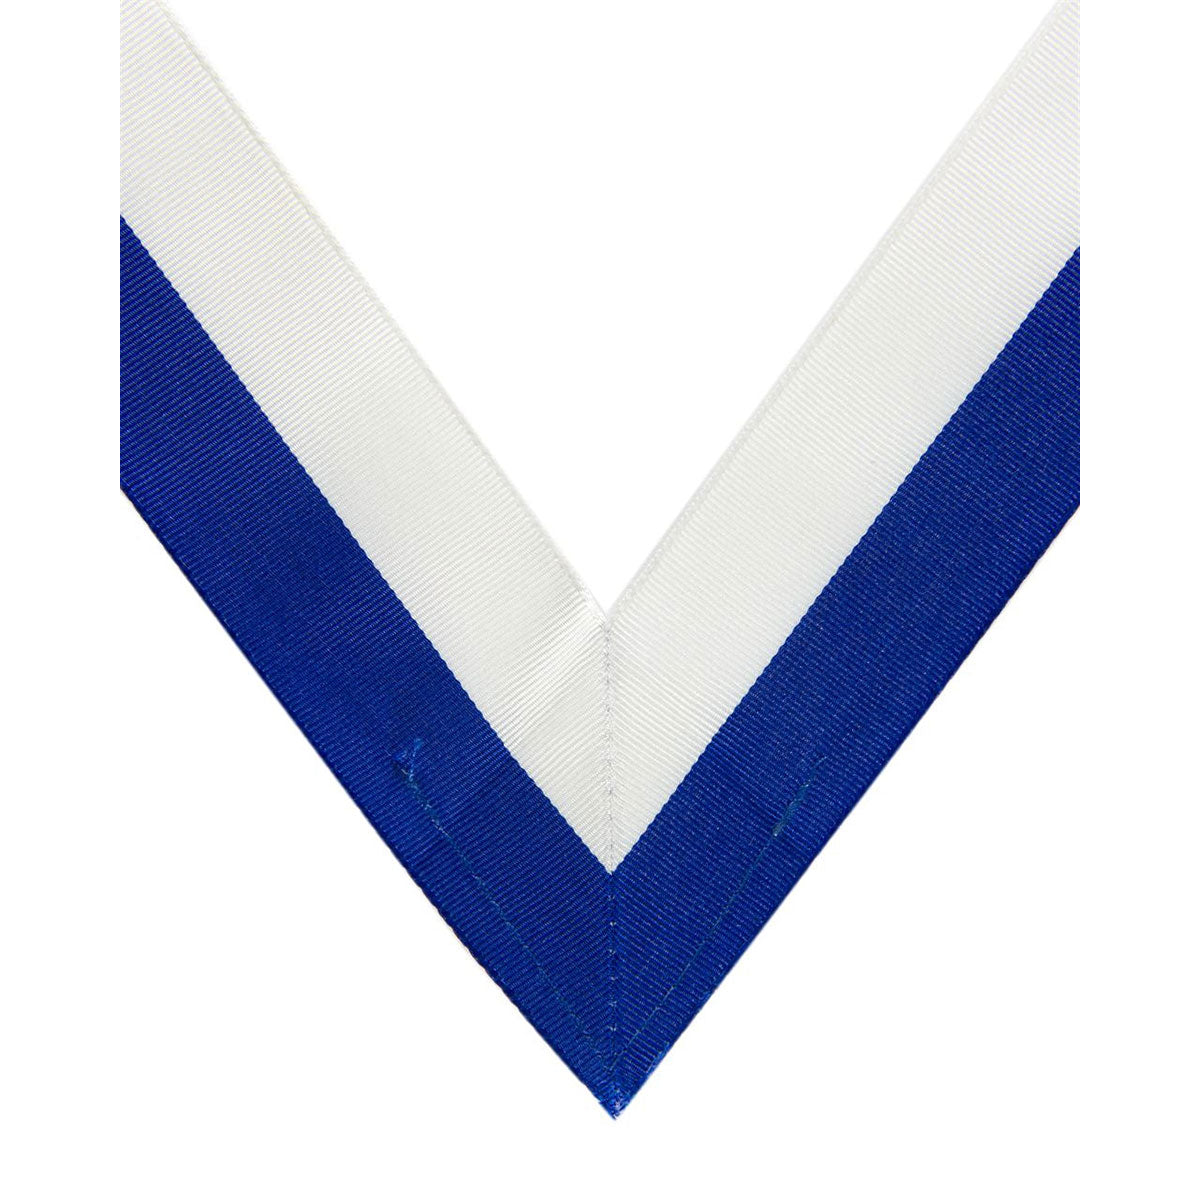 Lecturer Replacement Ribbon - White/Blue